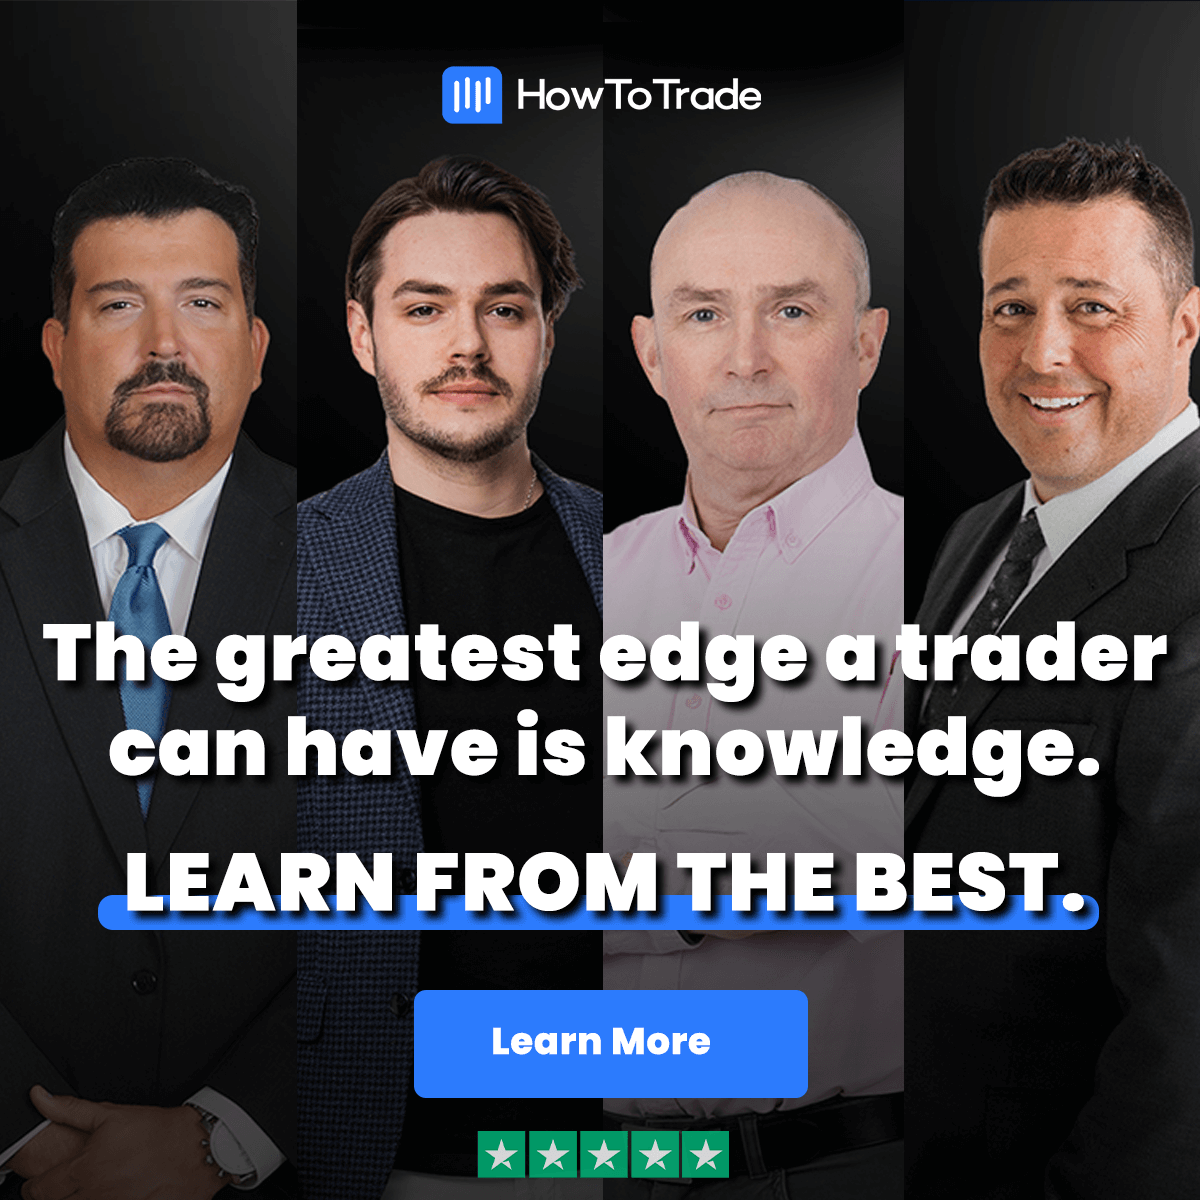 Where to Learn Forex Trading - how to trade